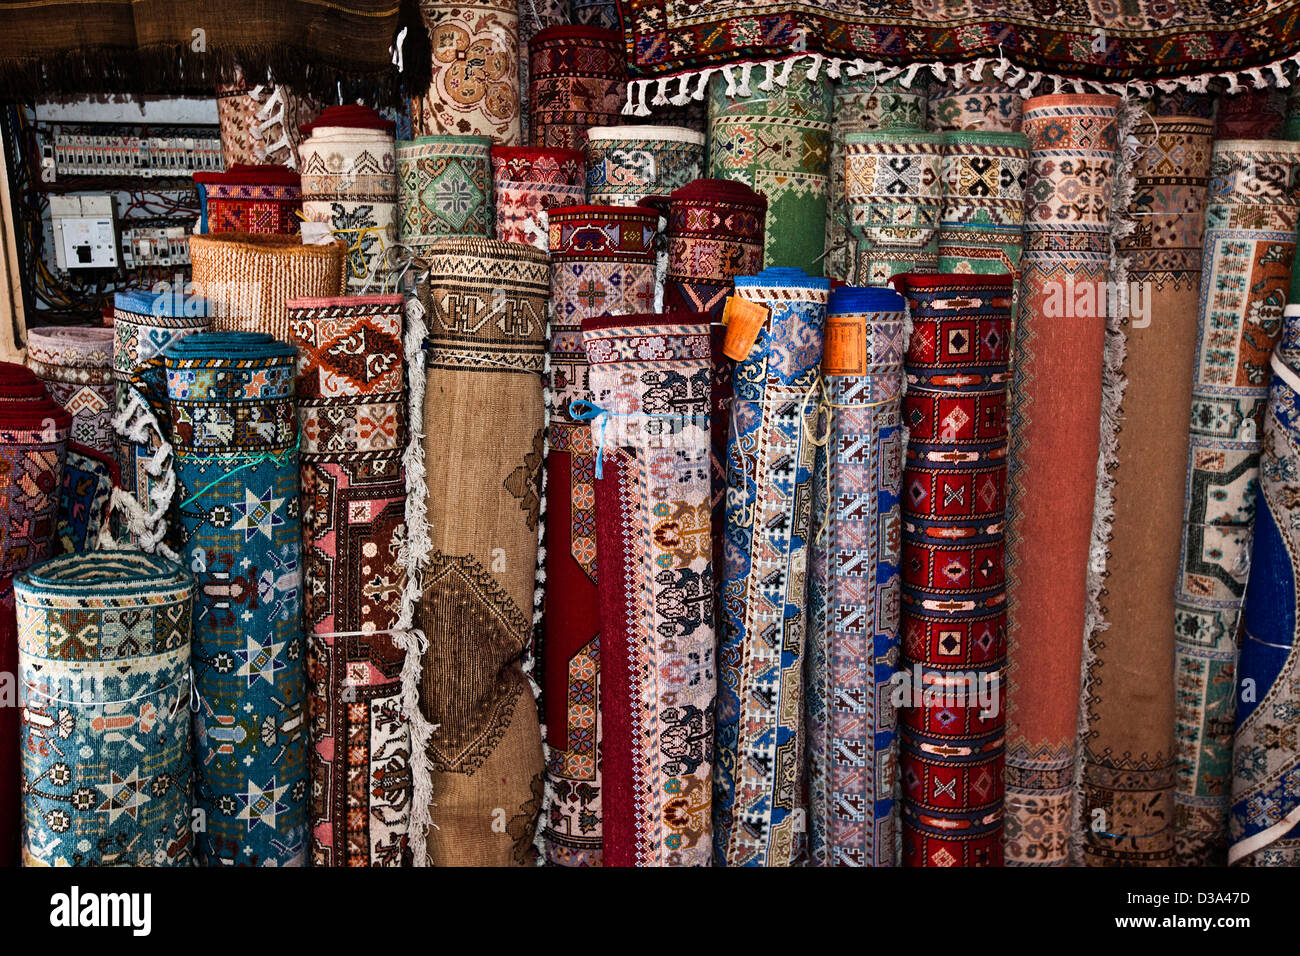 Rugs for sale in Souk, Marrakech, Morocco Stock Photo